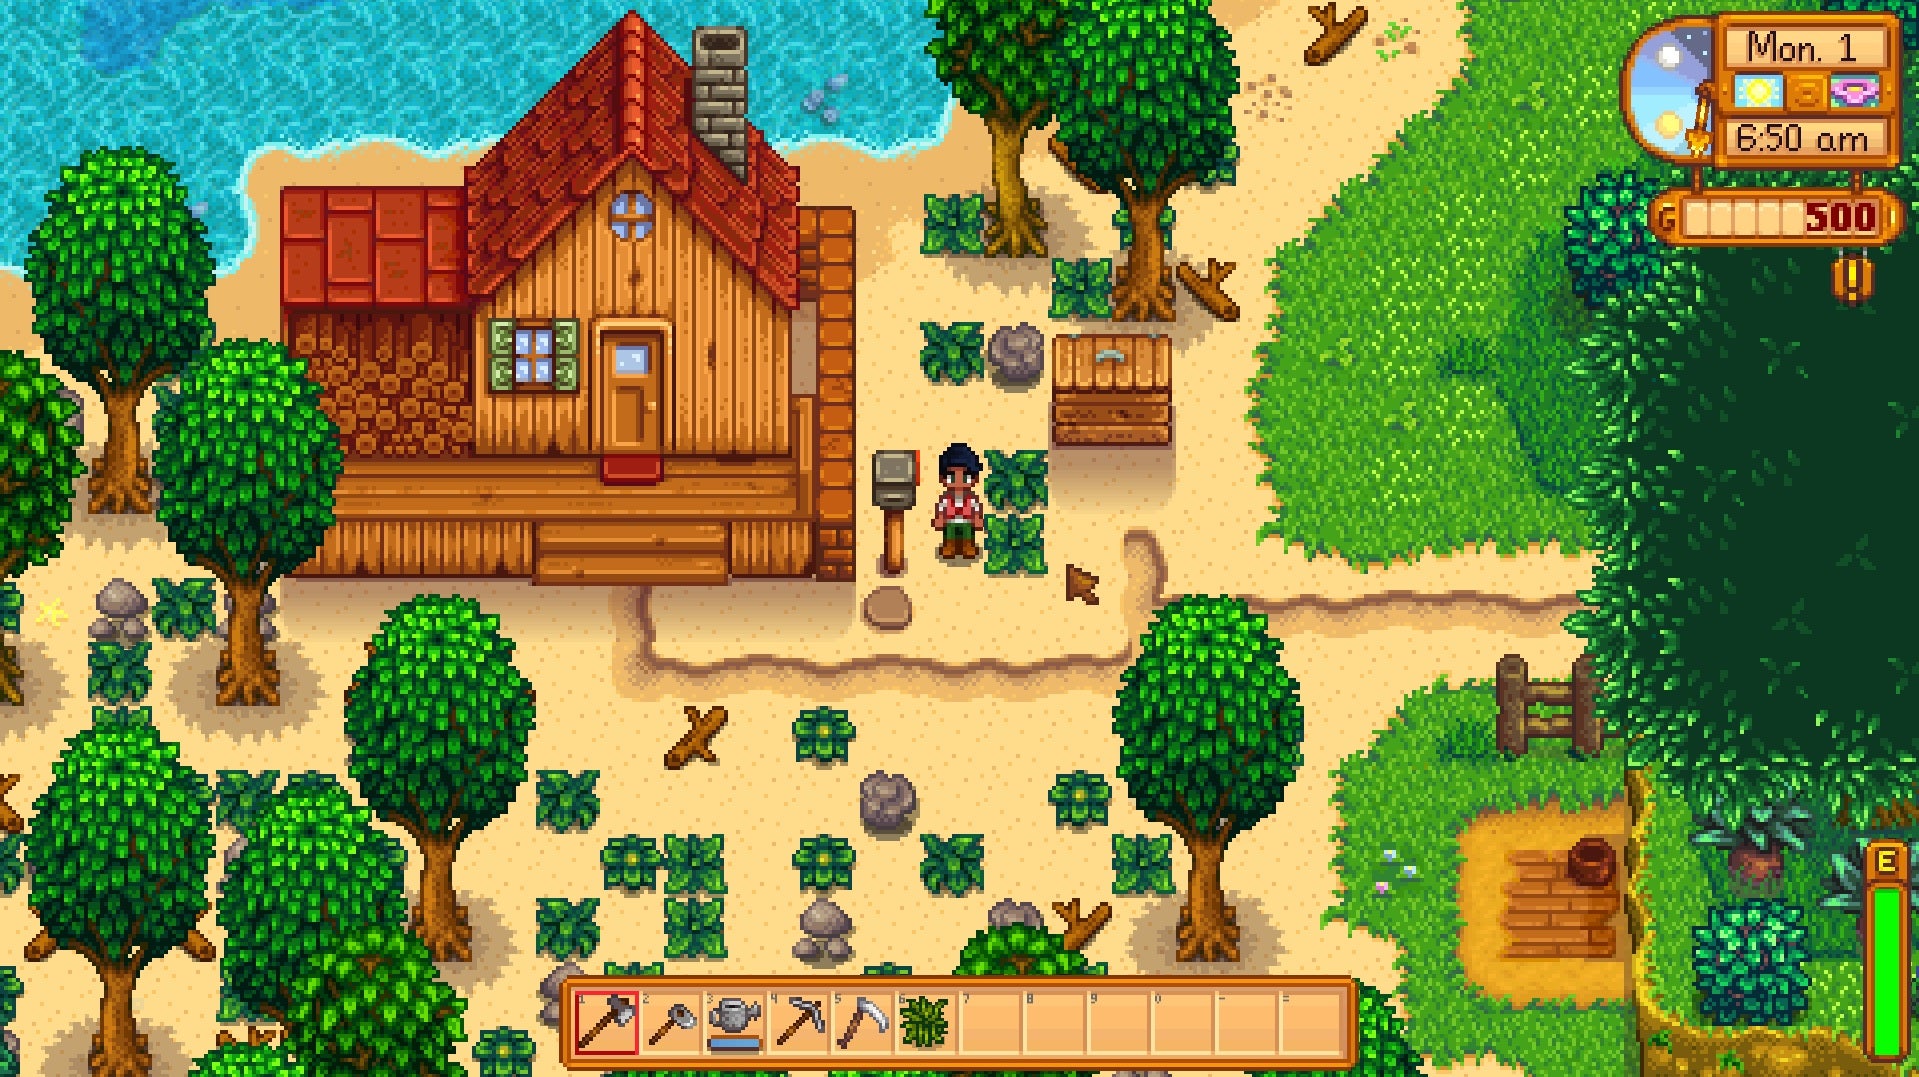 Stardew Valley update 1.5 is out now.